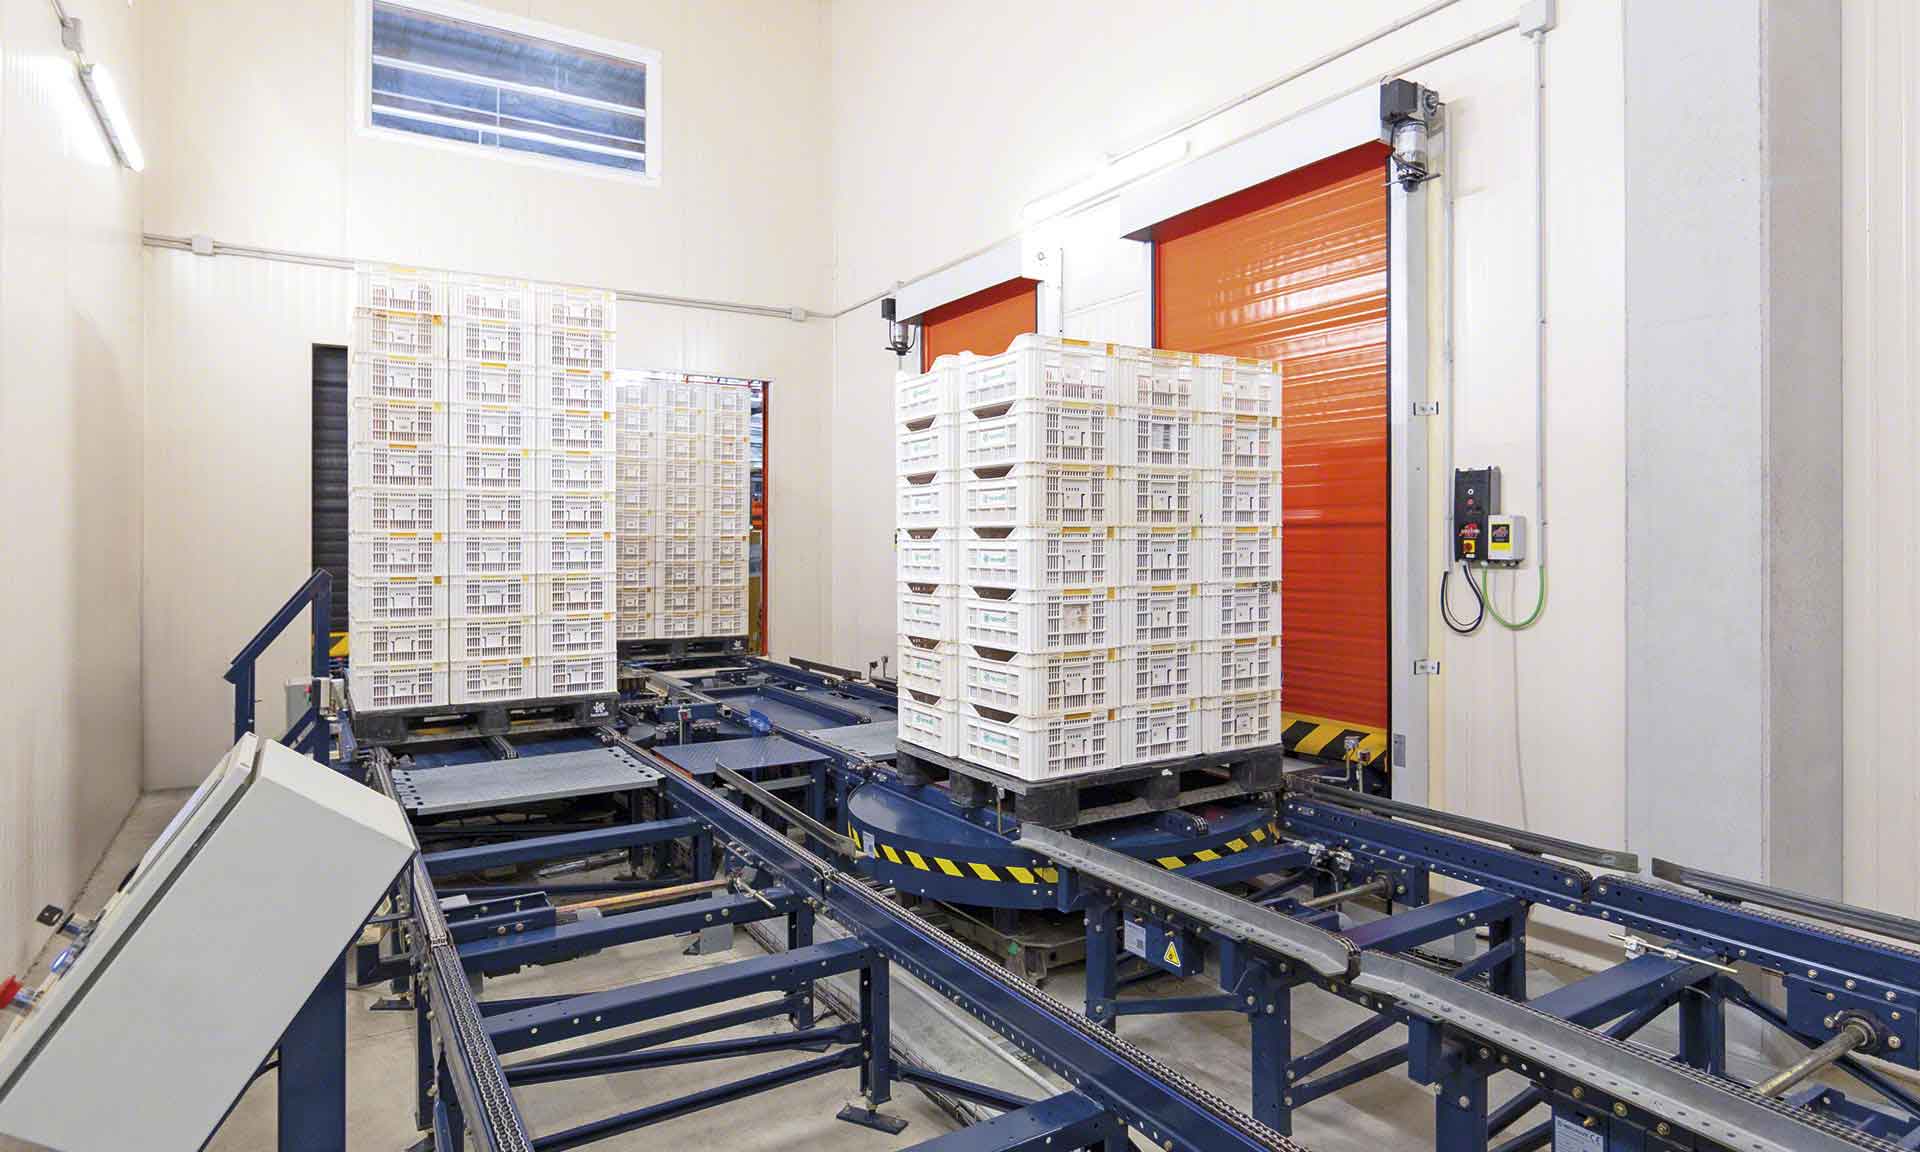 Cold storage warehousing: challenges and solutions